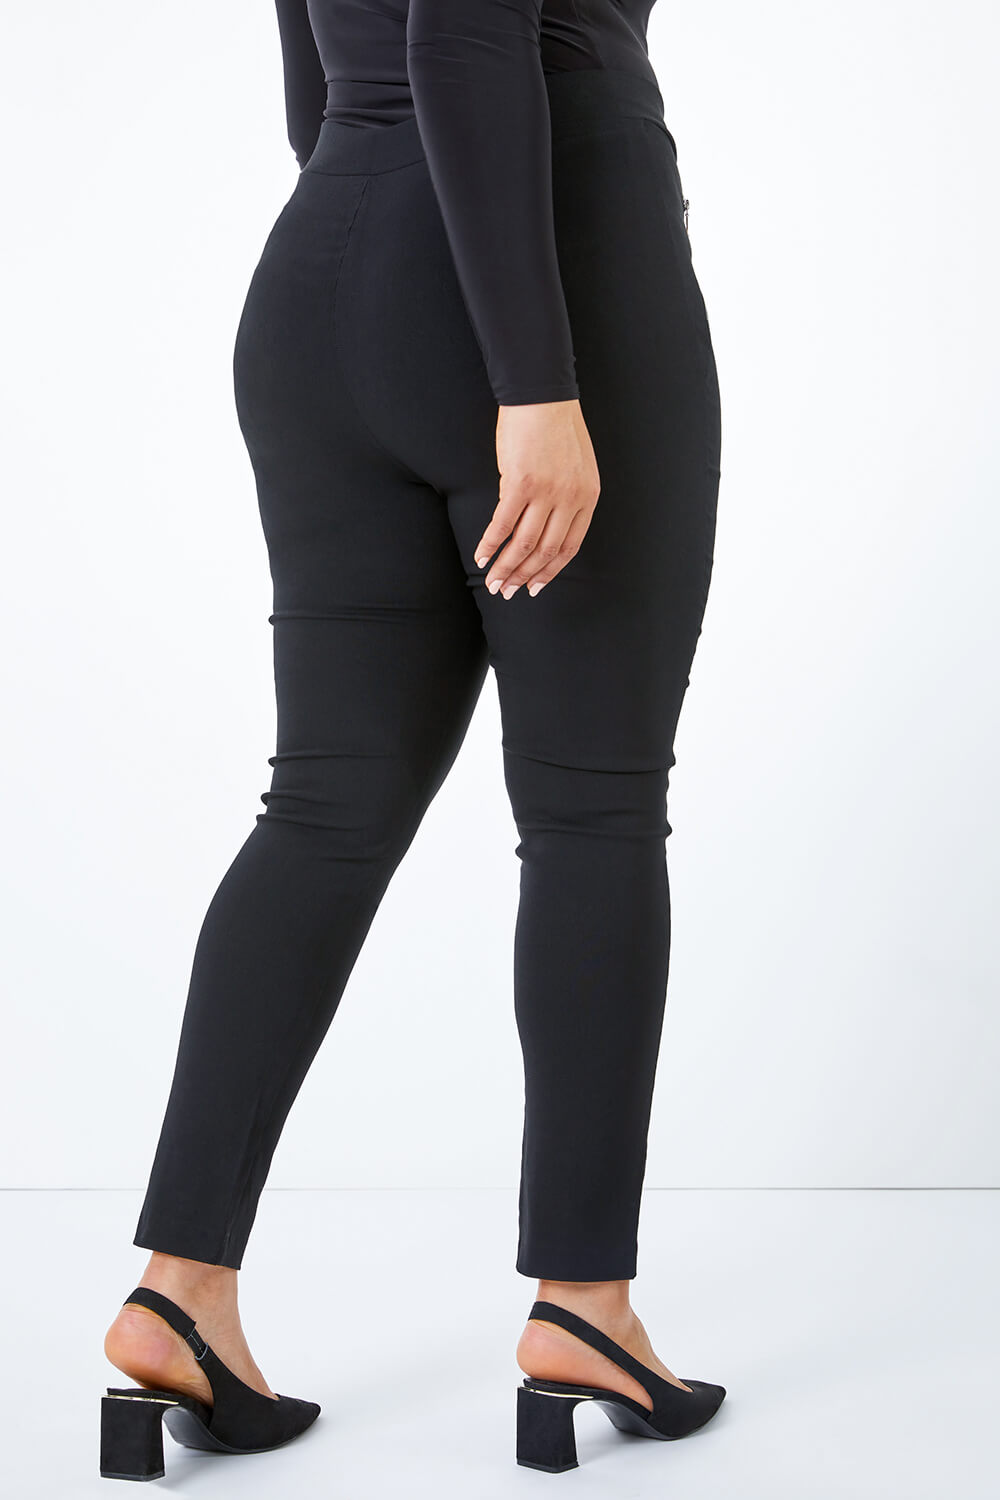 Black Curve Full Length Zip Stretch Trouser, Image 4 of 5